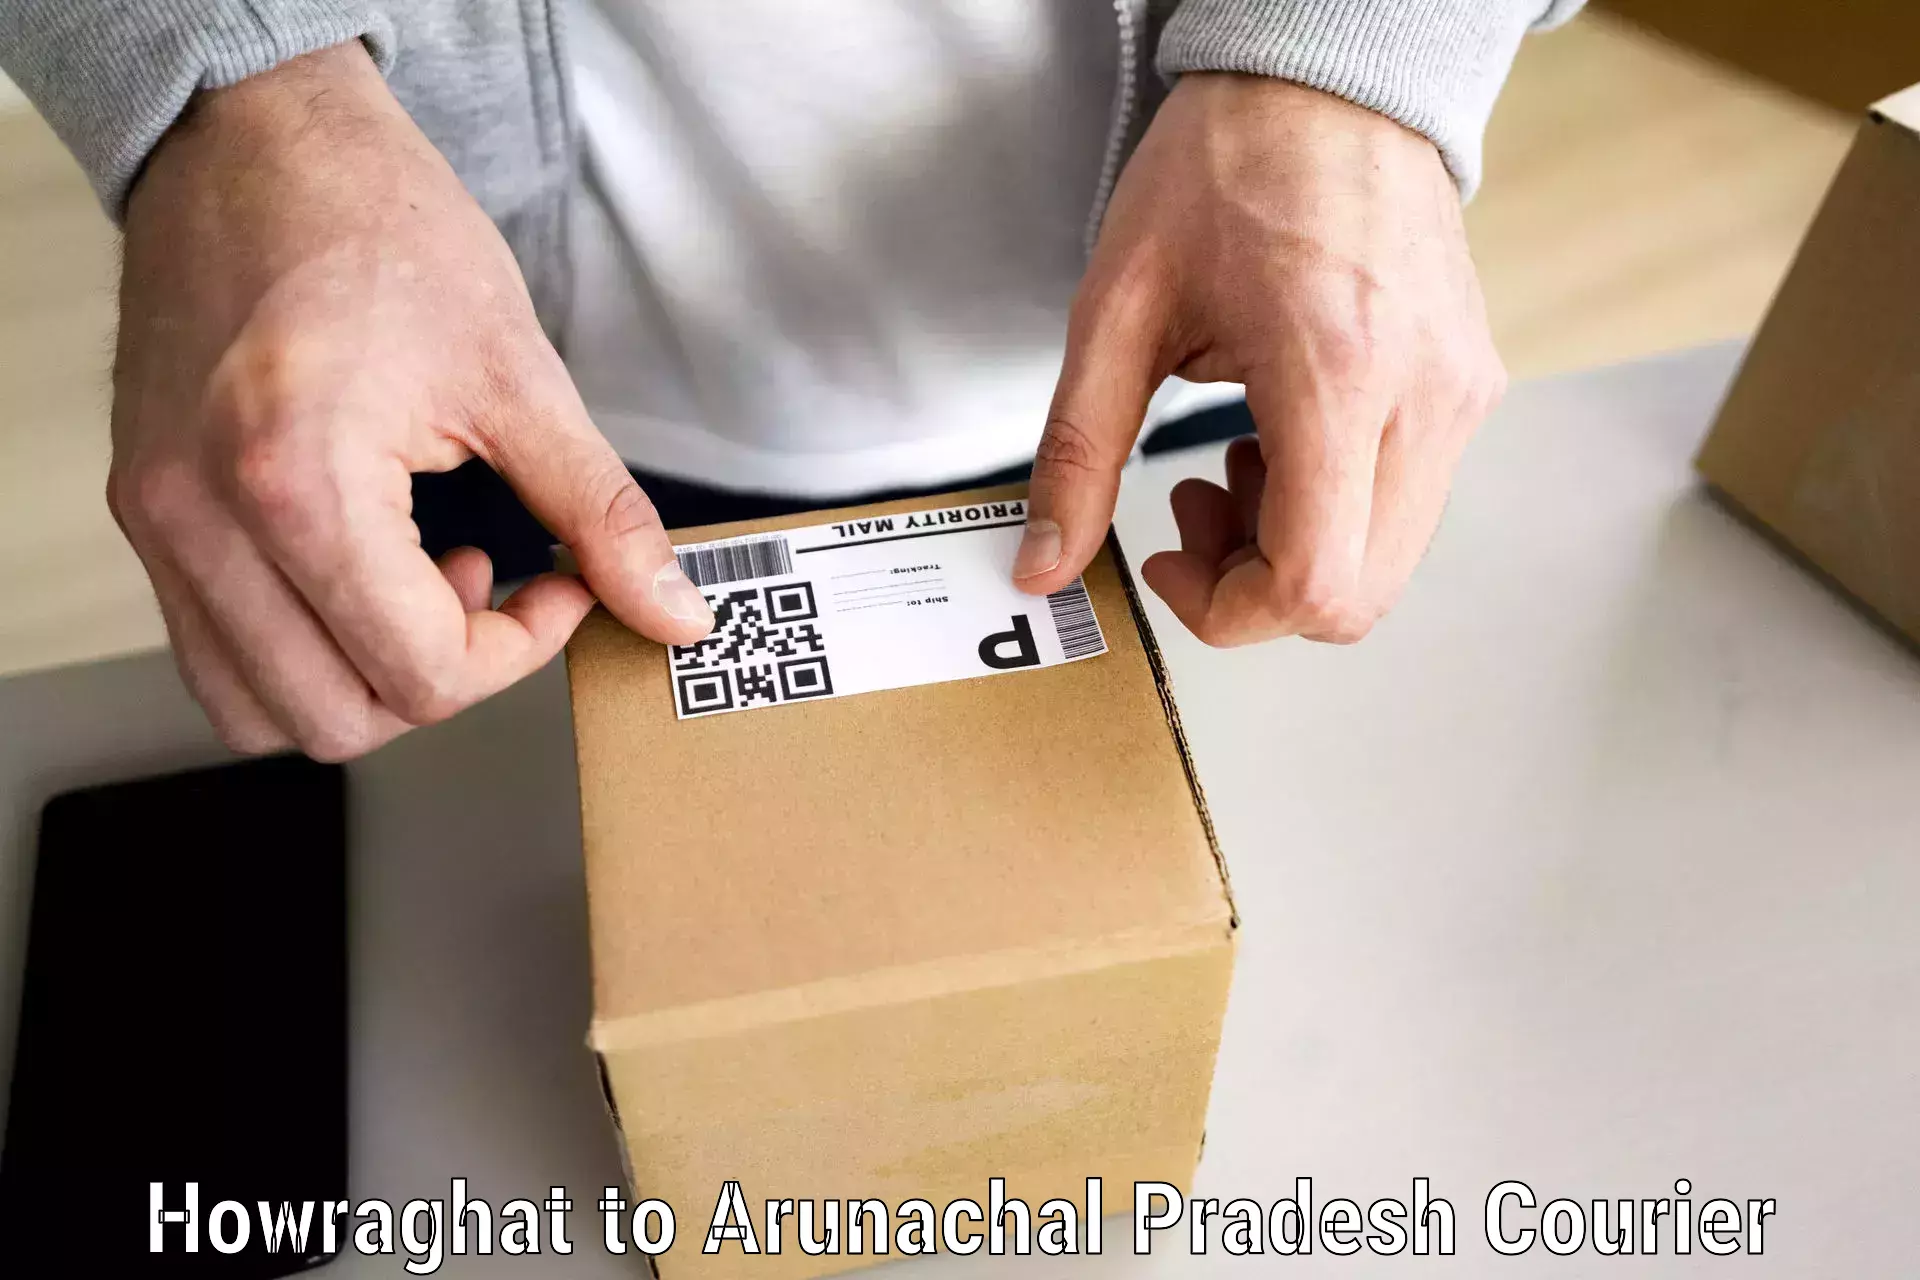 Efficient moving and packing Howraghat to Arunachal Pradesh